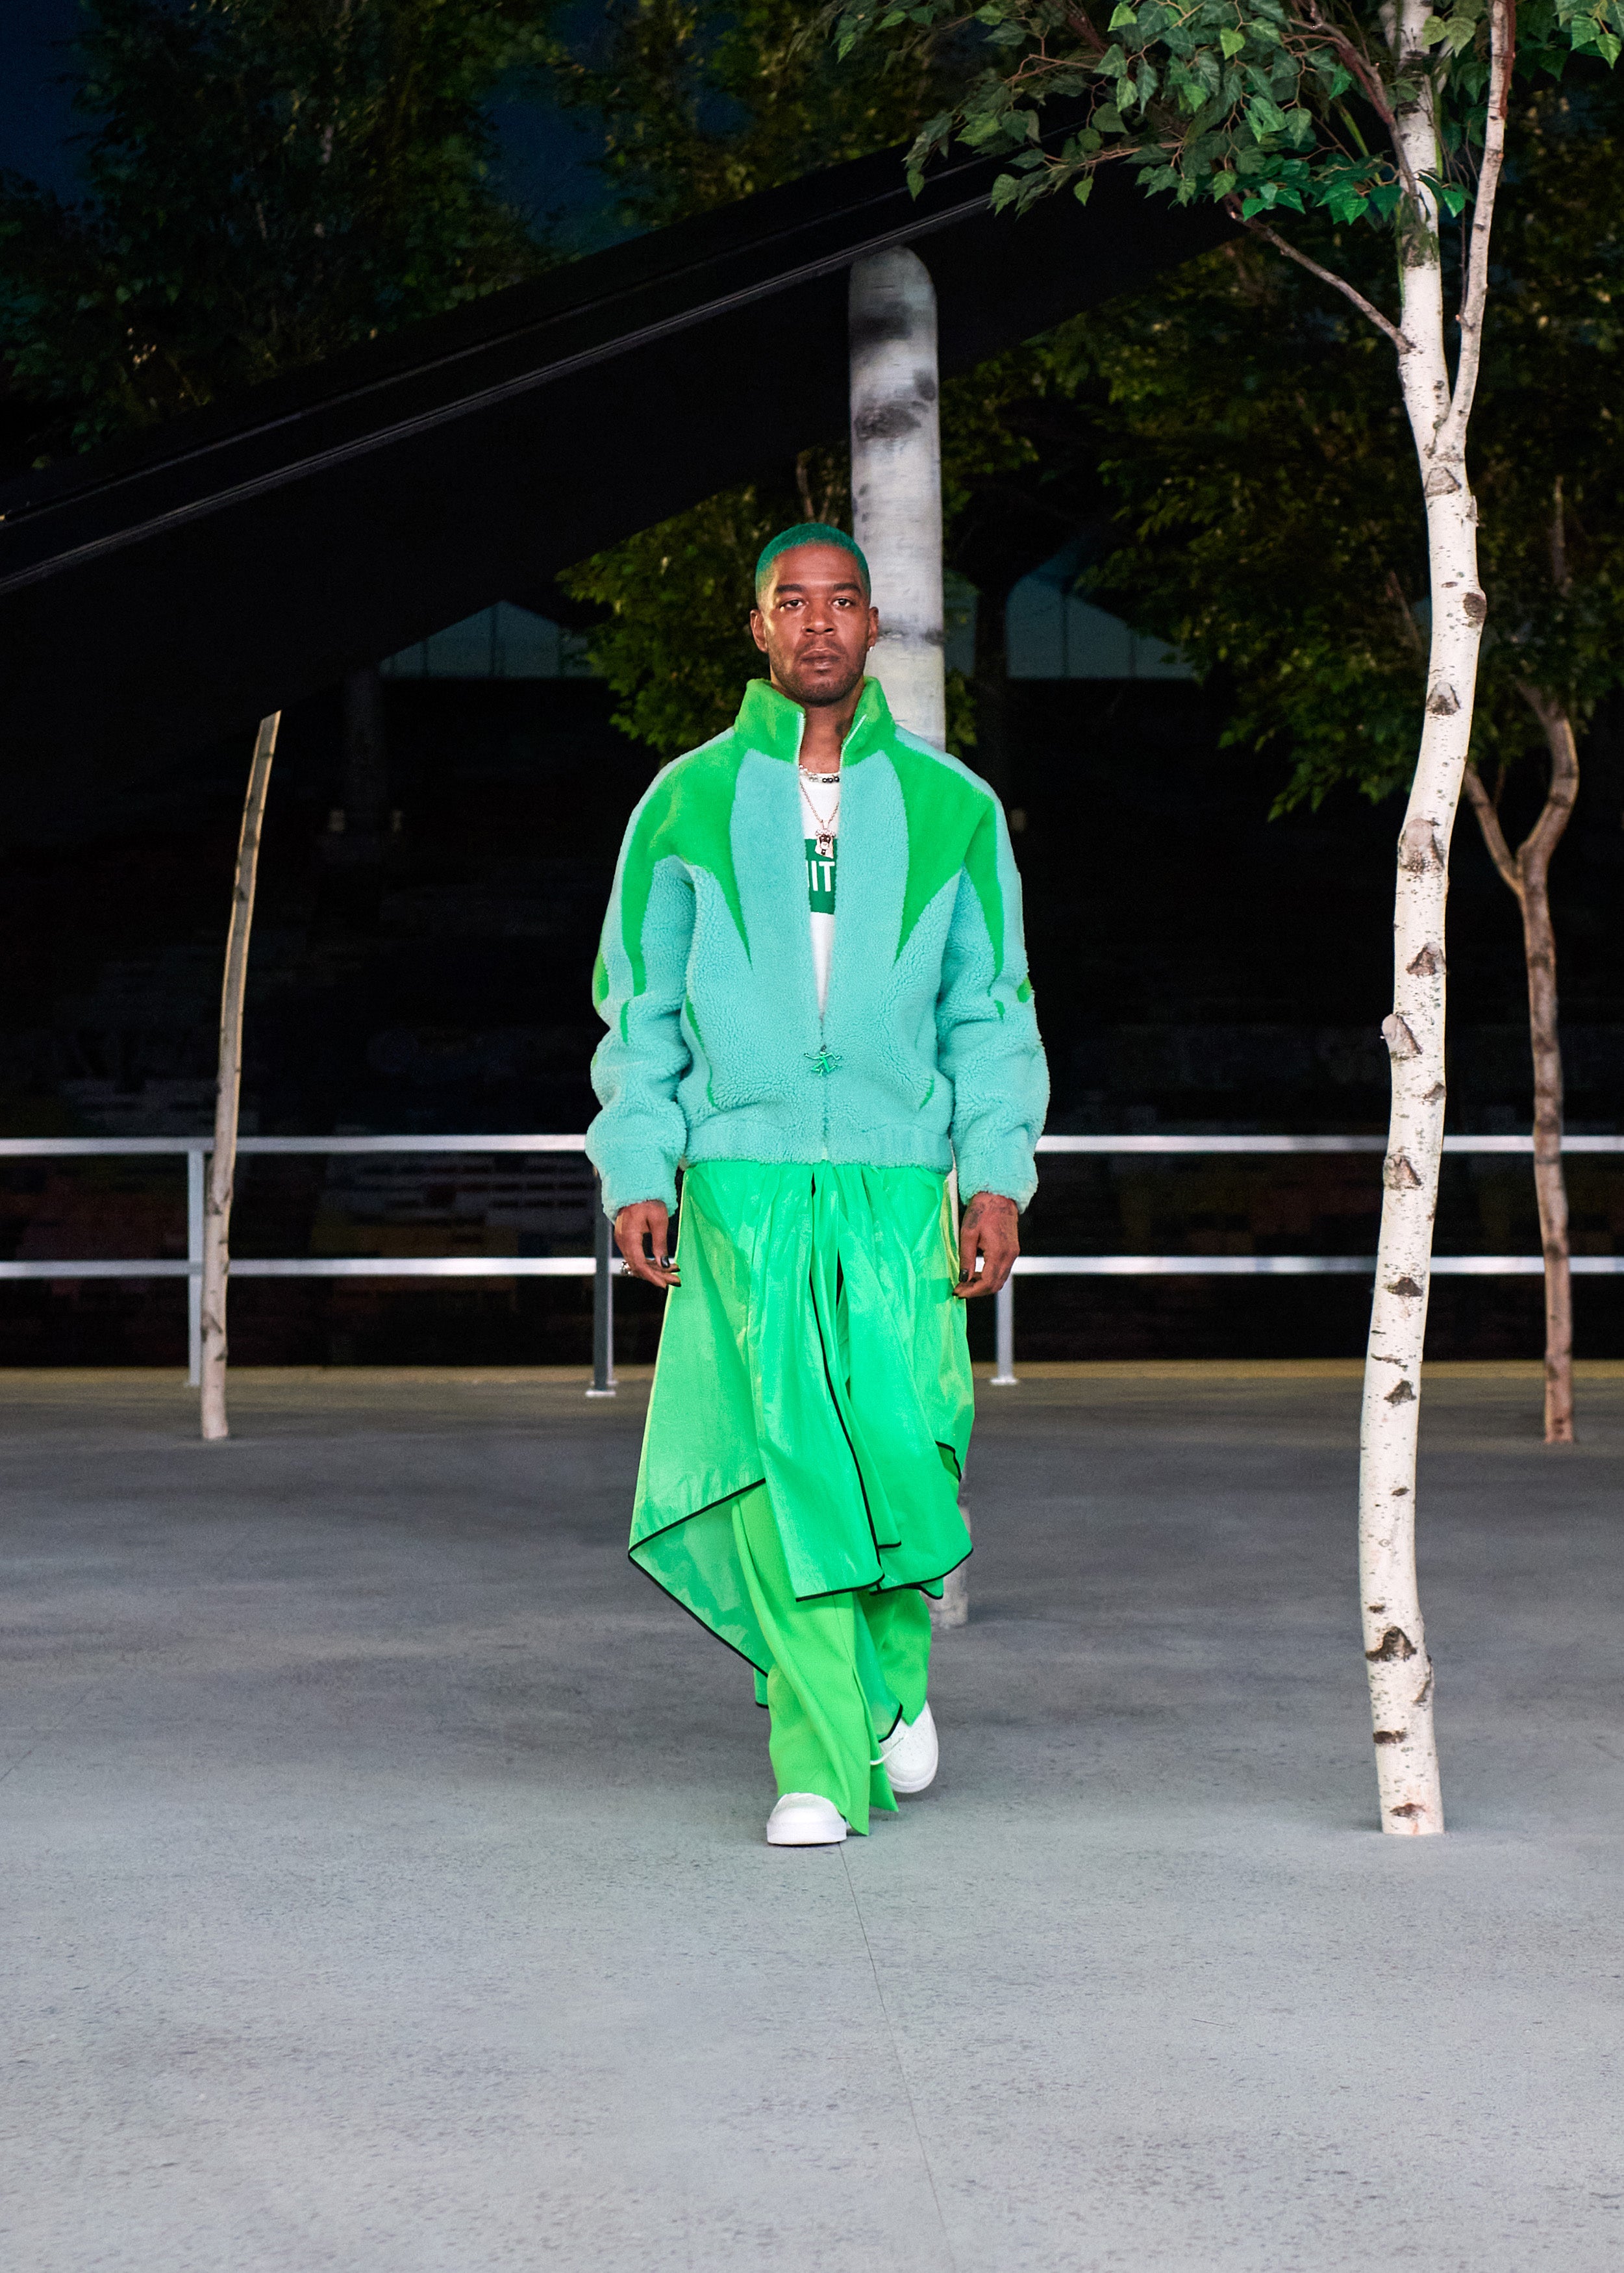 One of the looks from the show was modelled by Kid Cudi.